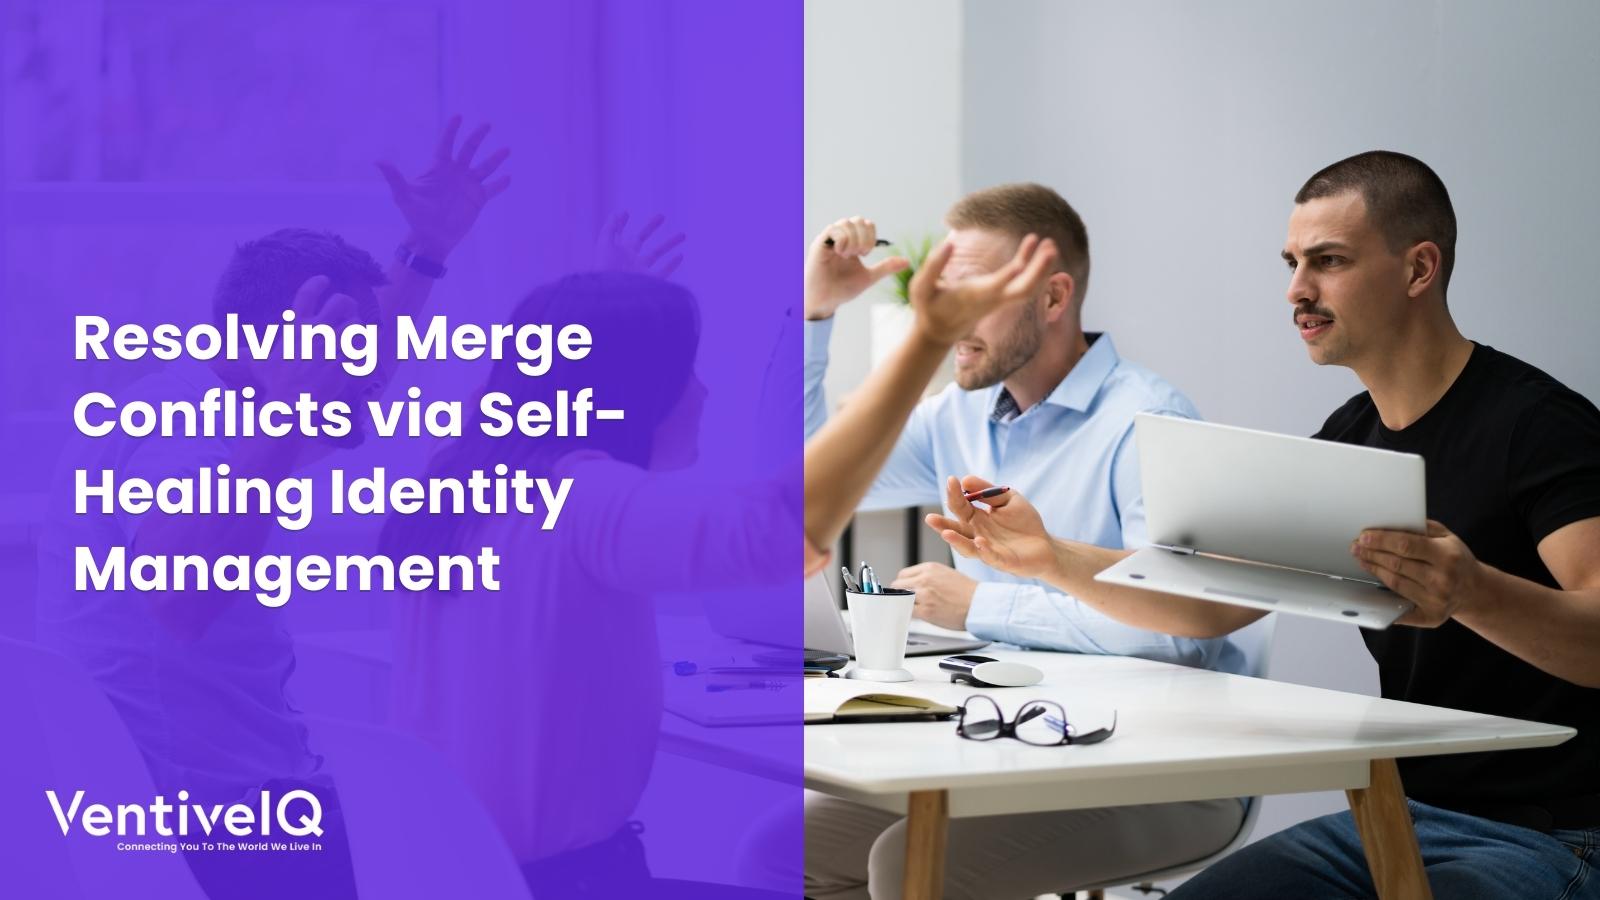 Resolving Merge Conflicts via Self-Healing Identity Management